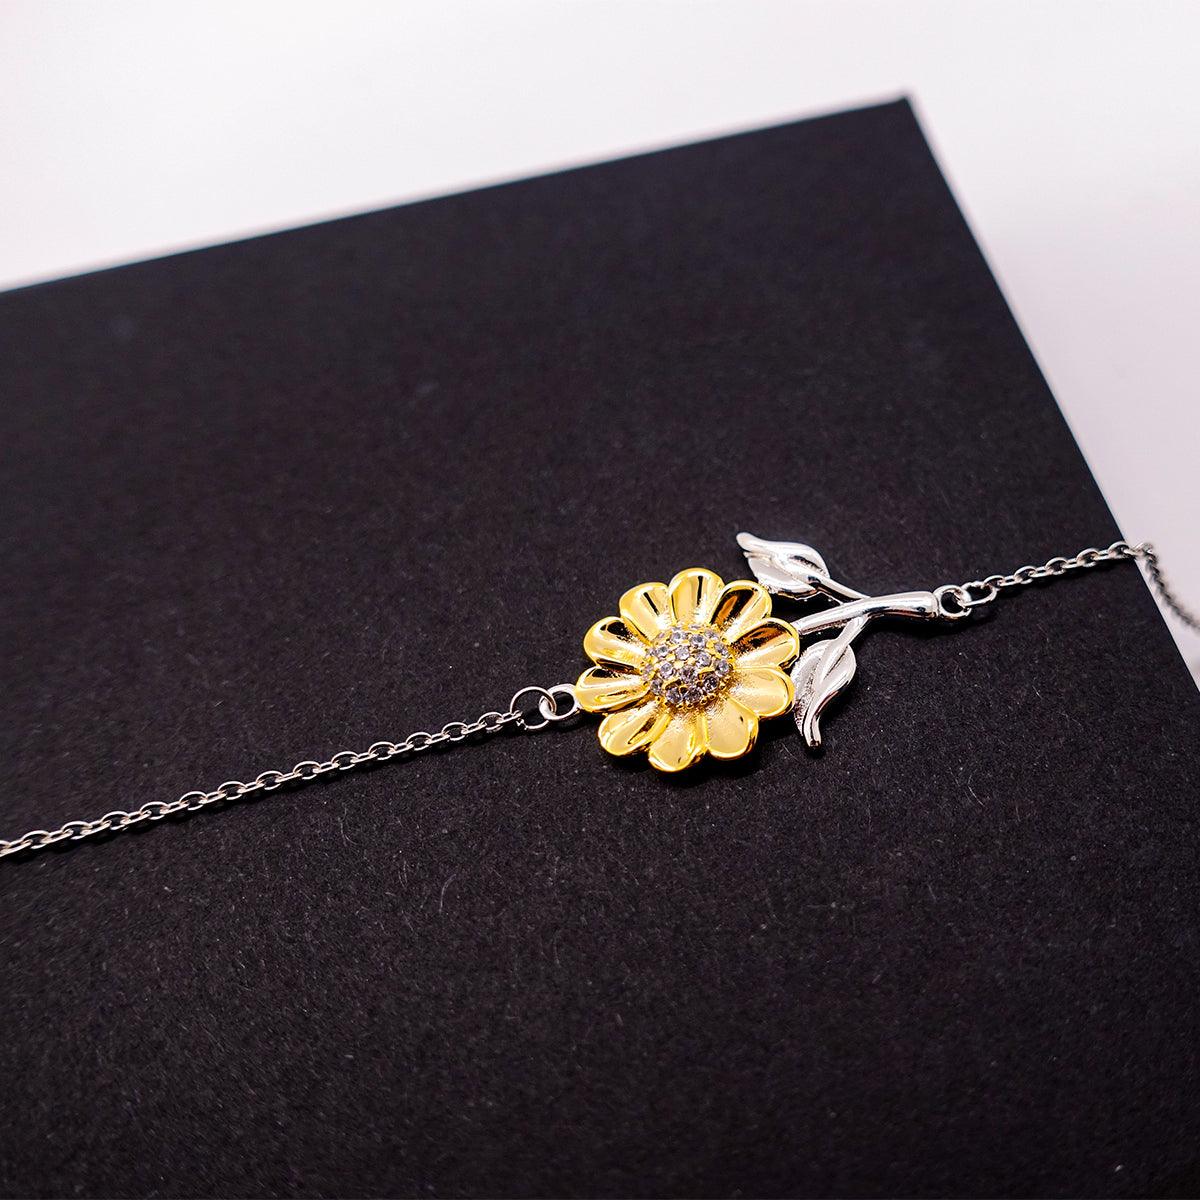 Occupational Therapist Sunflower Bracelet - Thanks for being who you are - Birthday Christmas Jewelry Gifts Coworkers Colleague Boss - Mallard Moon Gift Shop